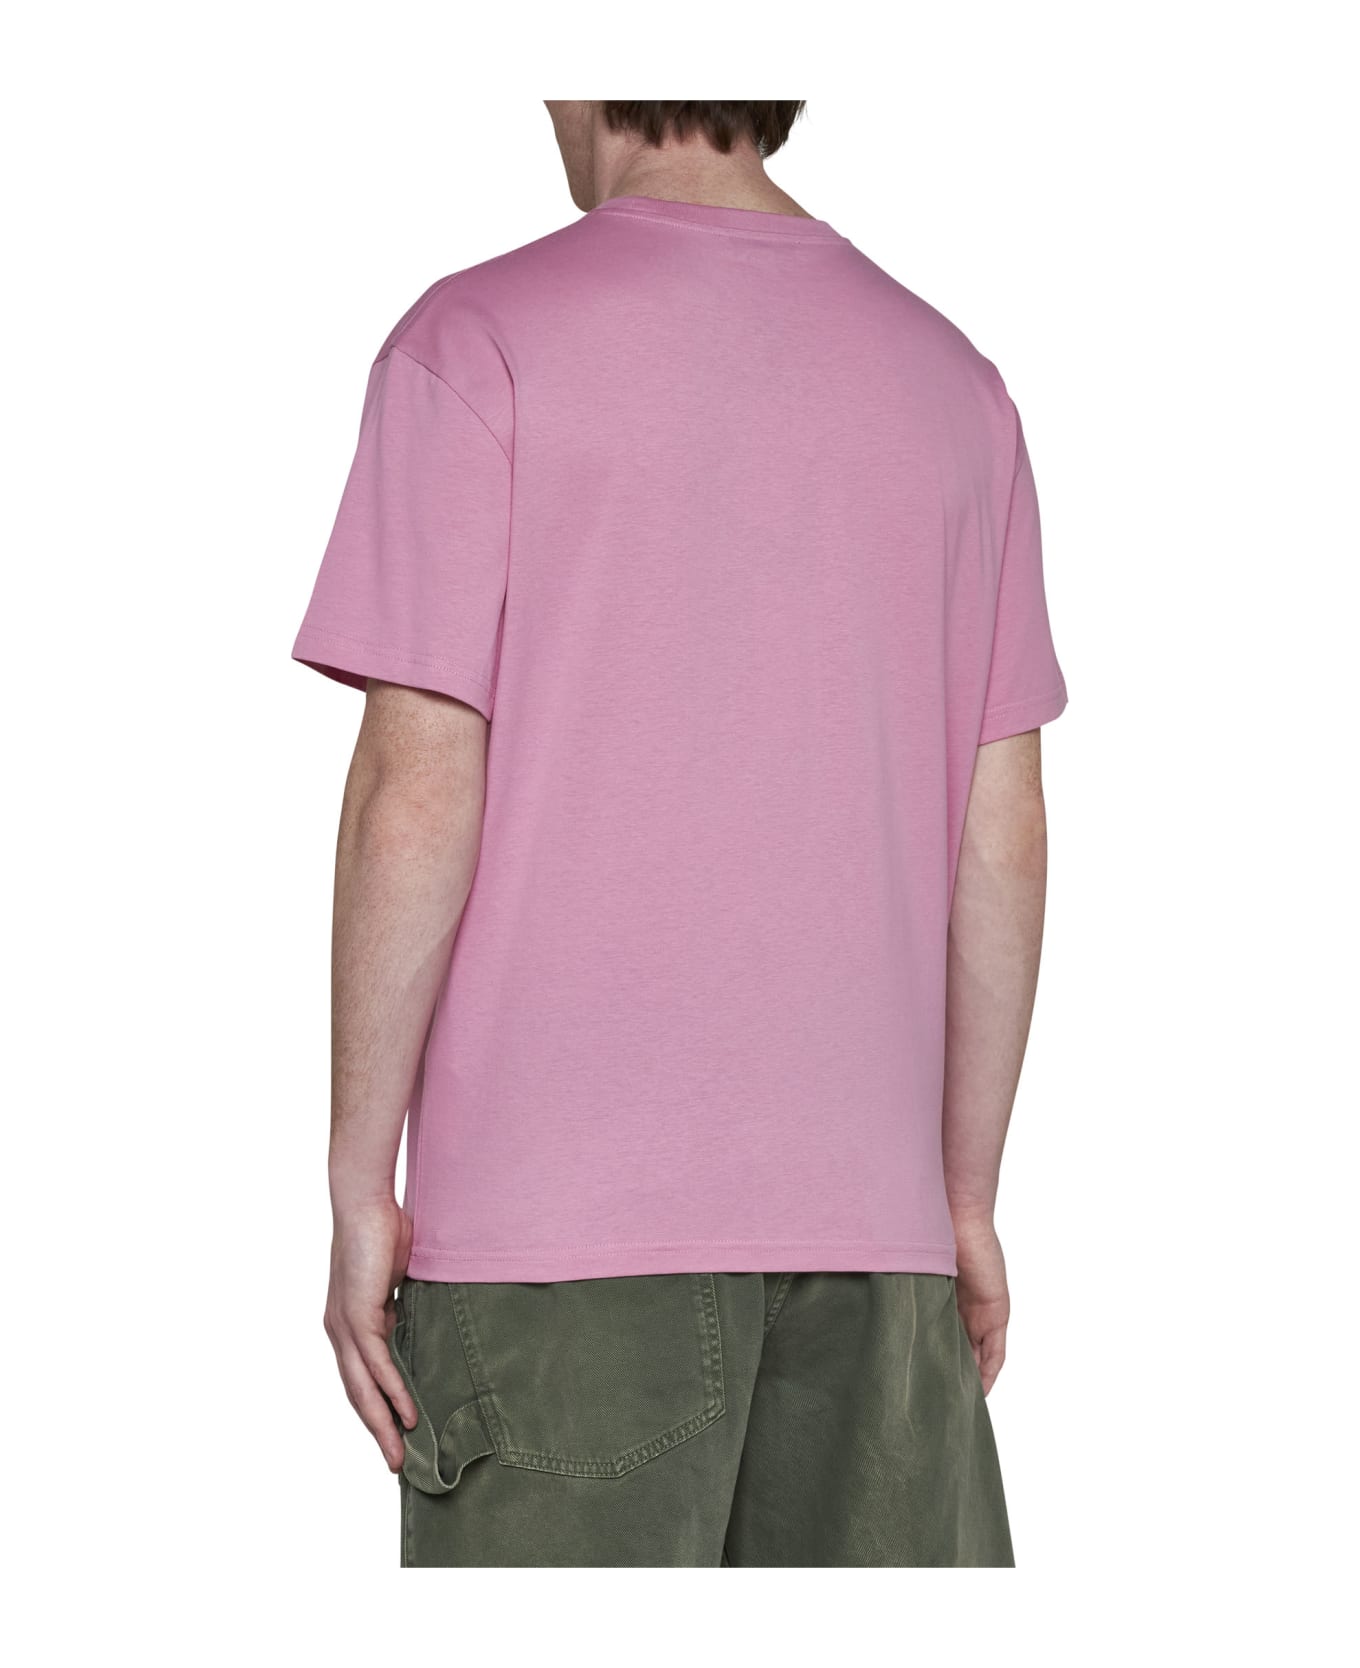 J.W. Anderson T-Shirt - Pink